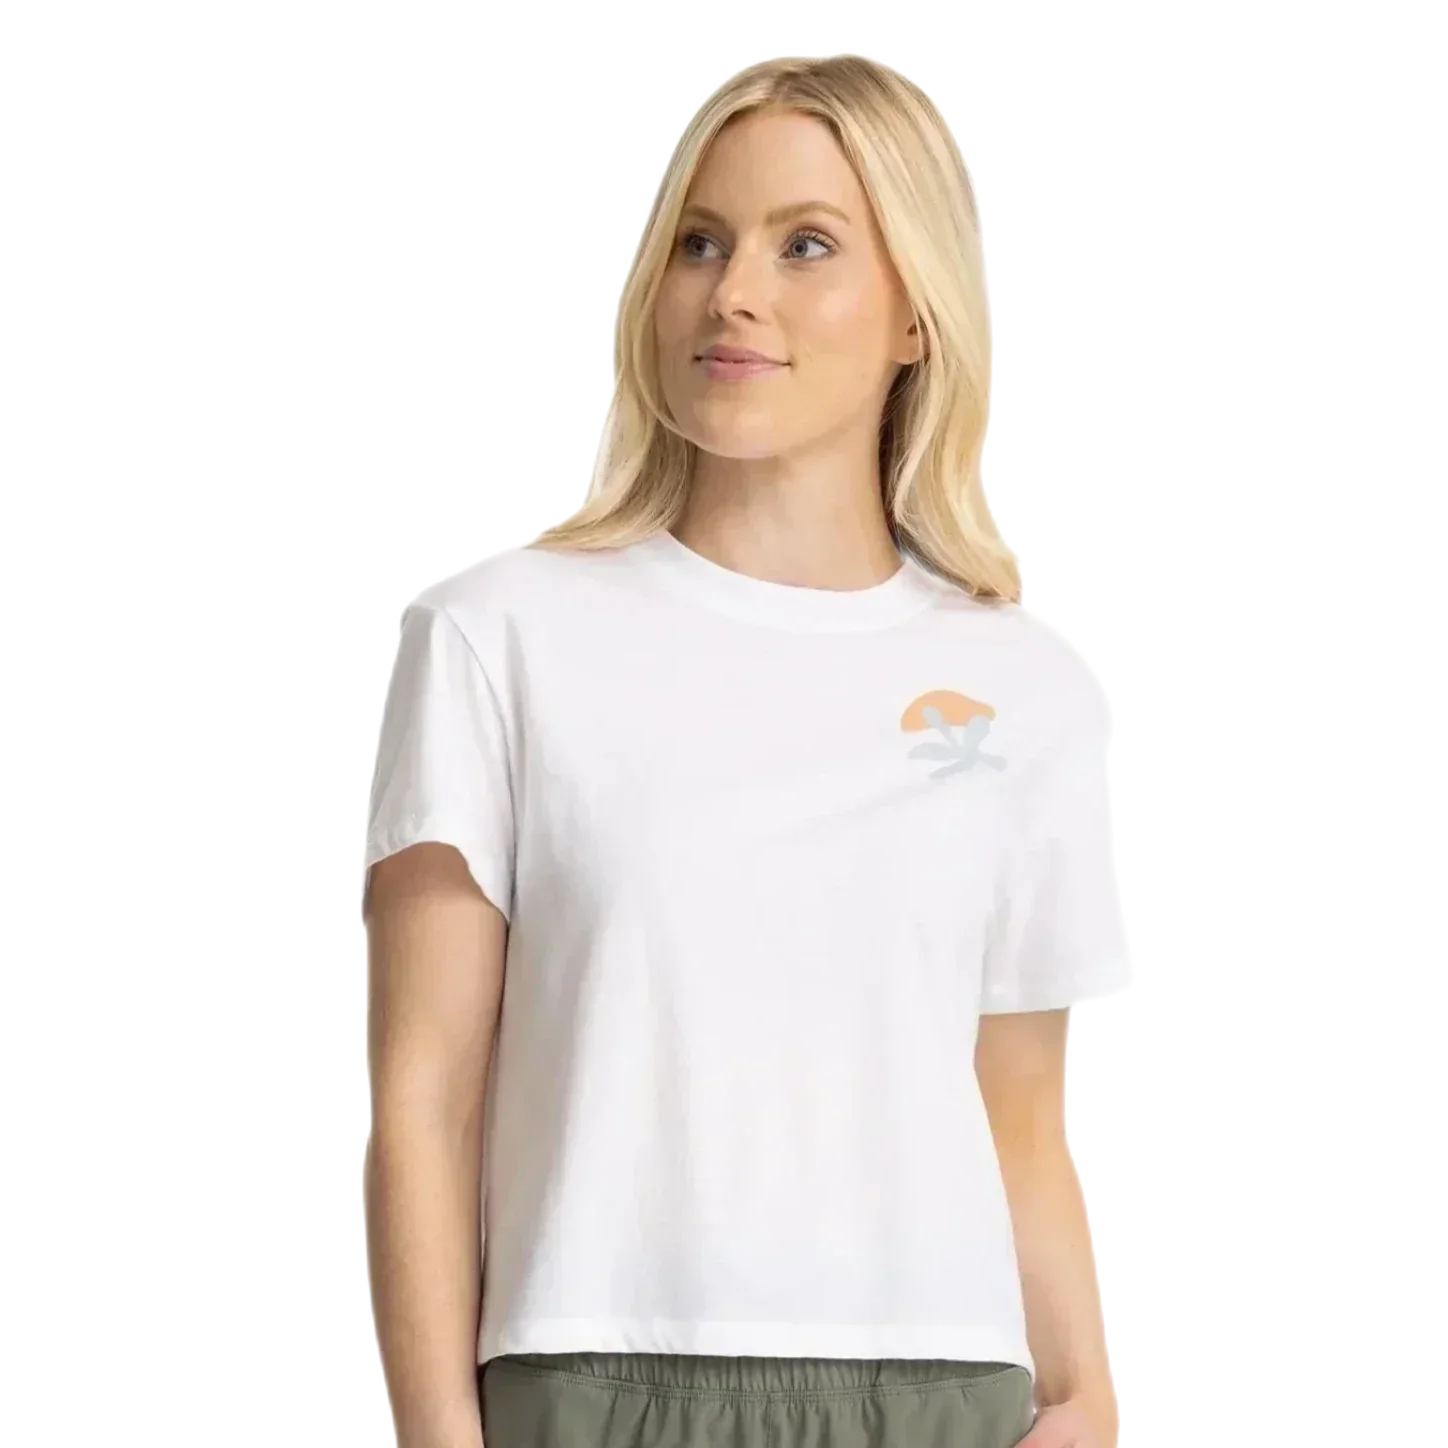 Free Fly Apparel 01. MENS APPAREL - MENS T-SHIRTS - MENS T-SHIRT SS Women's Coral Tee WHITE